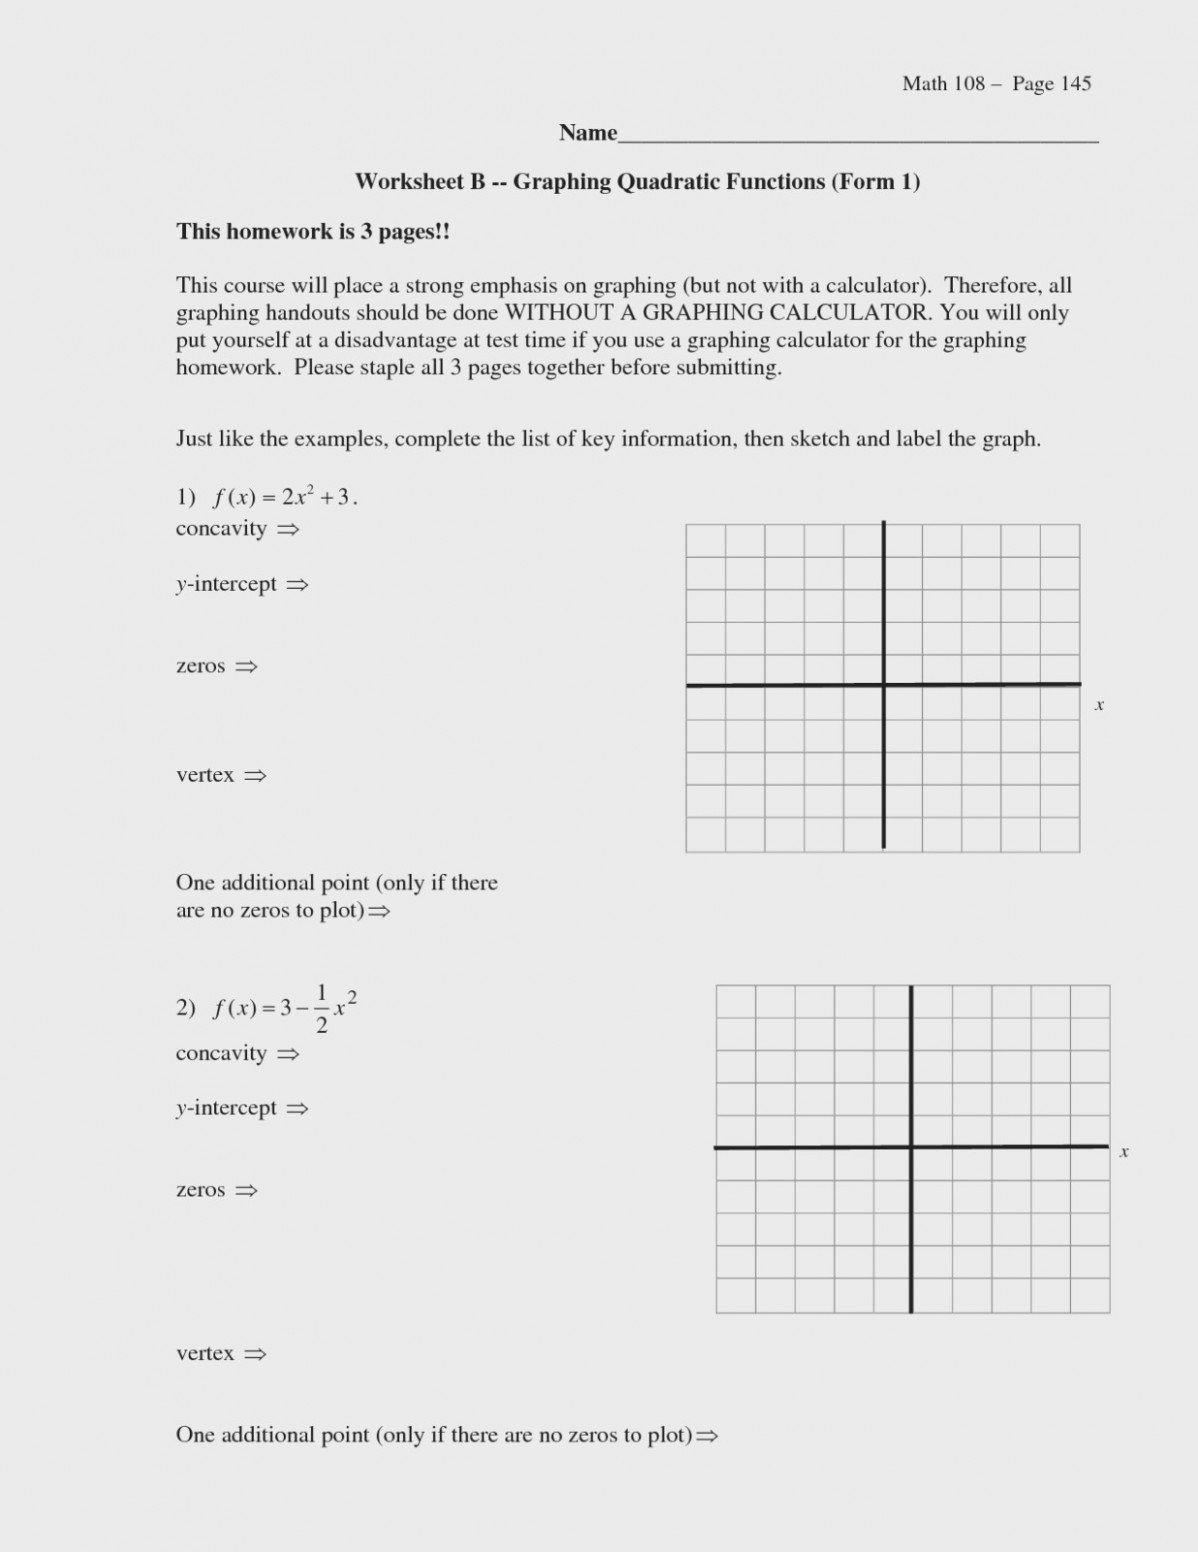 Practice Worksheet Graphing Quadratic Functions In Standard Form The Regarding Practice Worksheet Graphing Quadratic Functions In Standard Form Answers